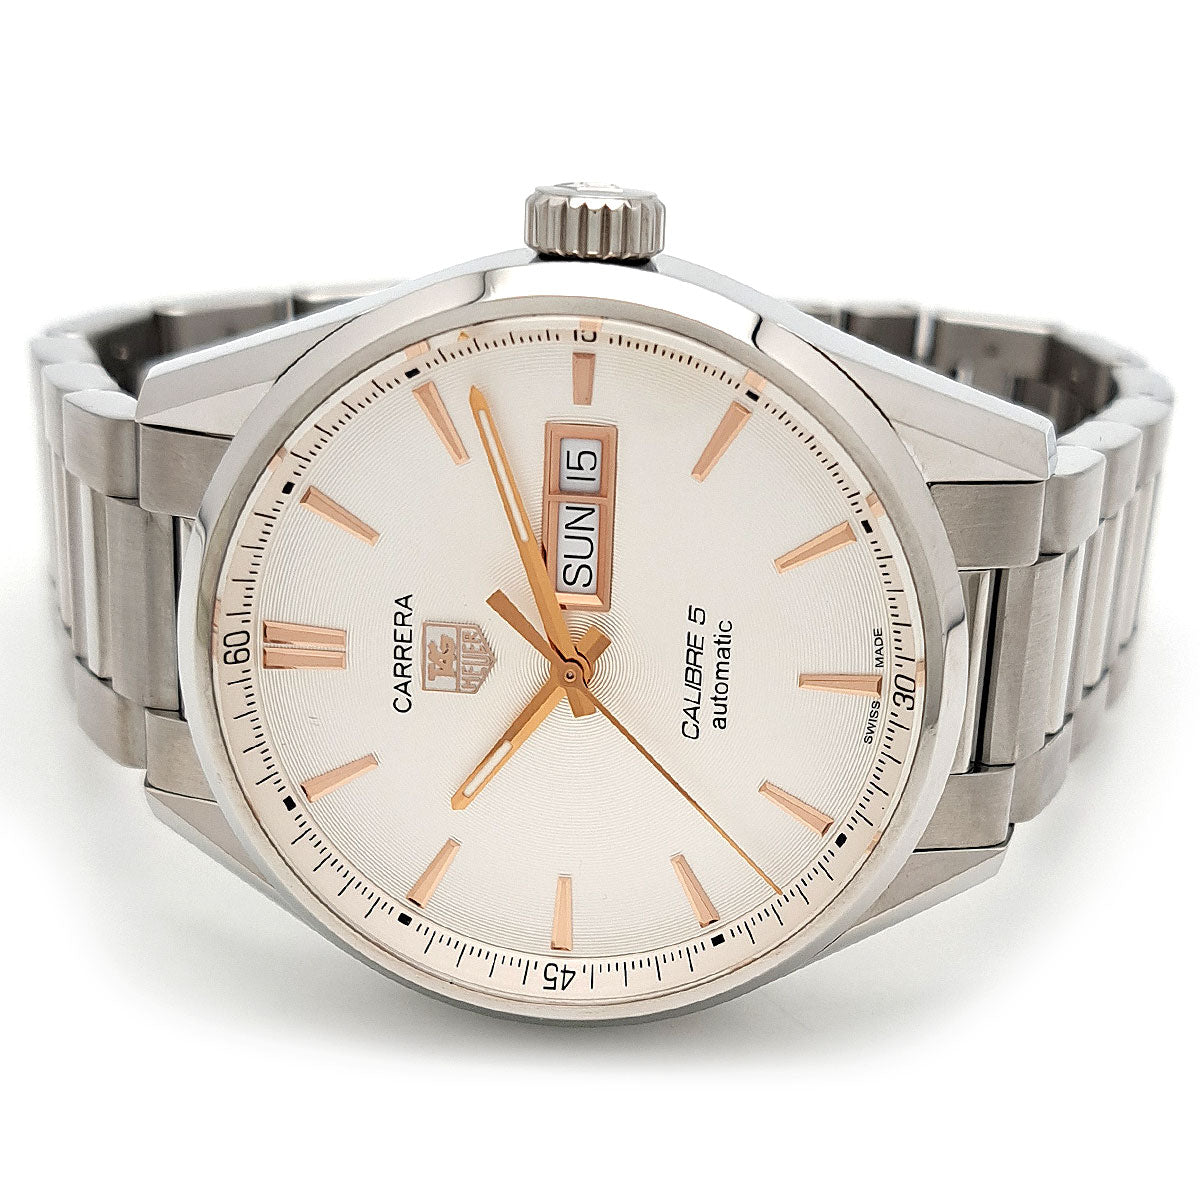 TAG HEUER Carrera Calibre 5 Day-Date WAR201D.BA0723 Automatic Stainless Steel Men’s Pre-owned Watch WAR201D.BA0723